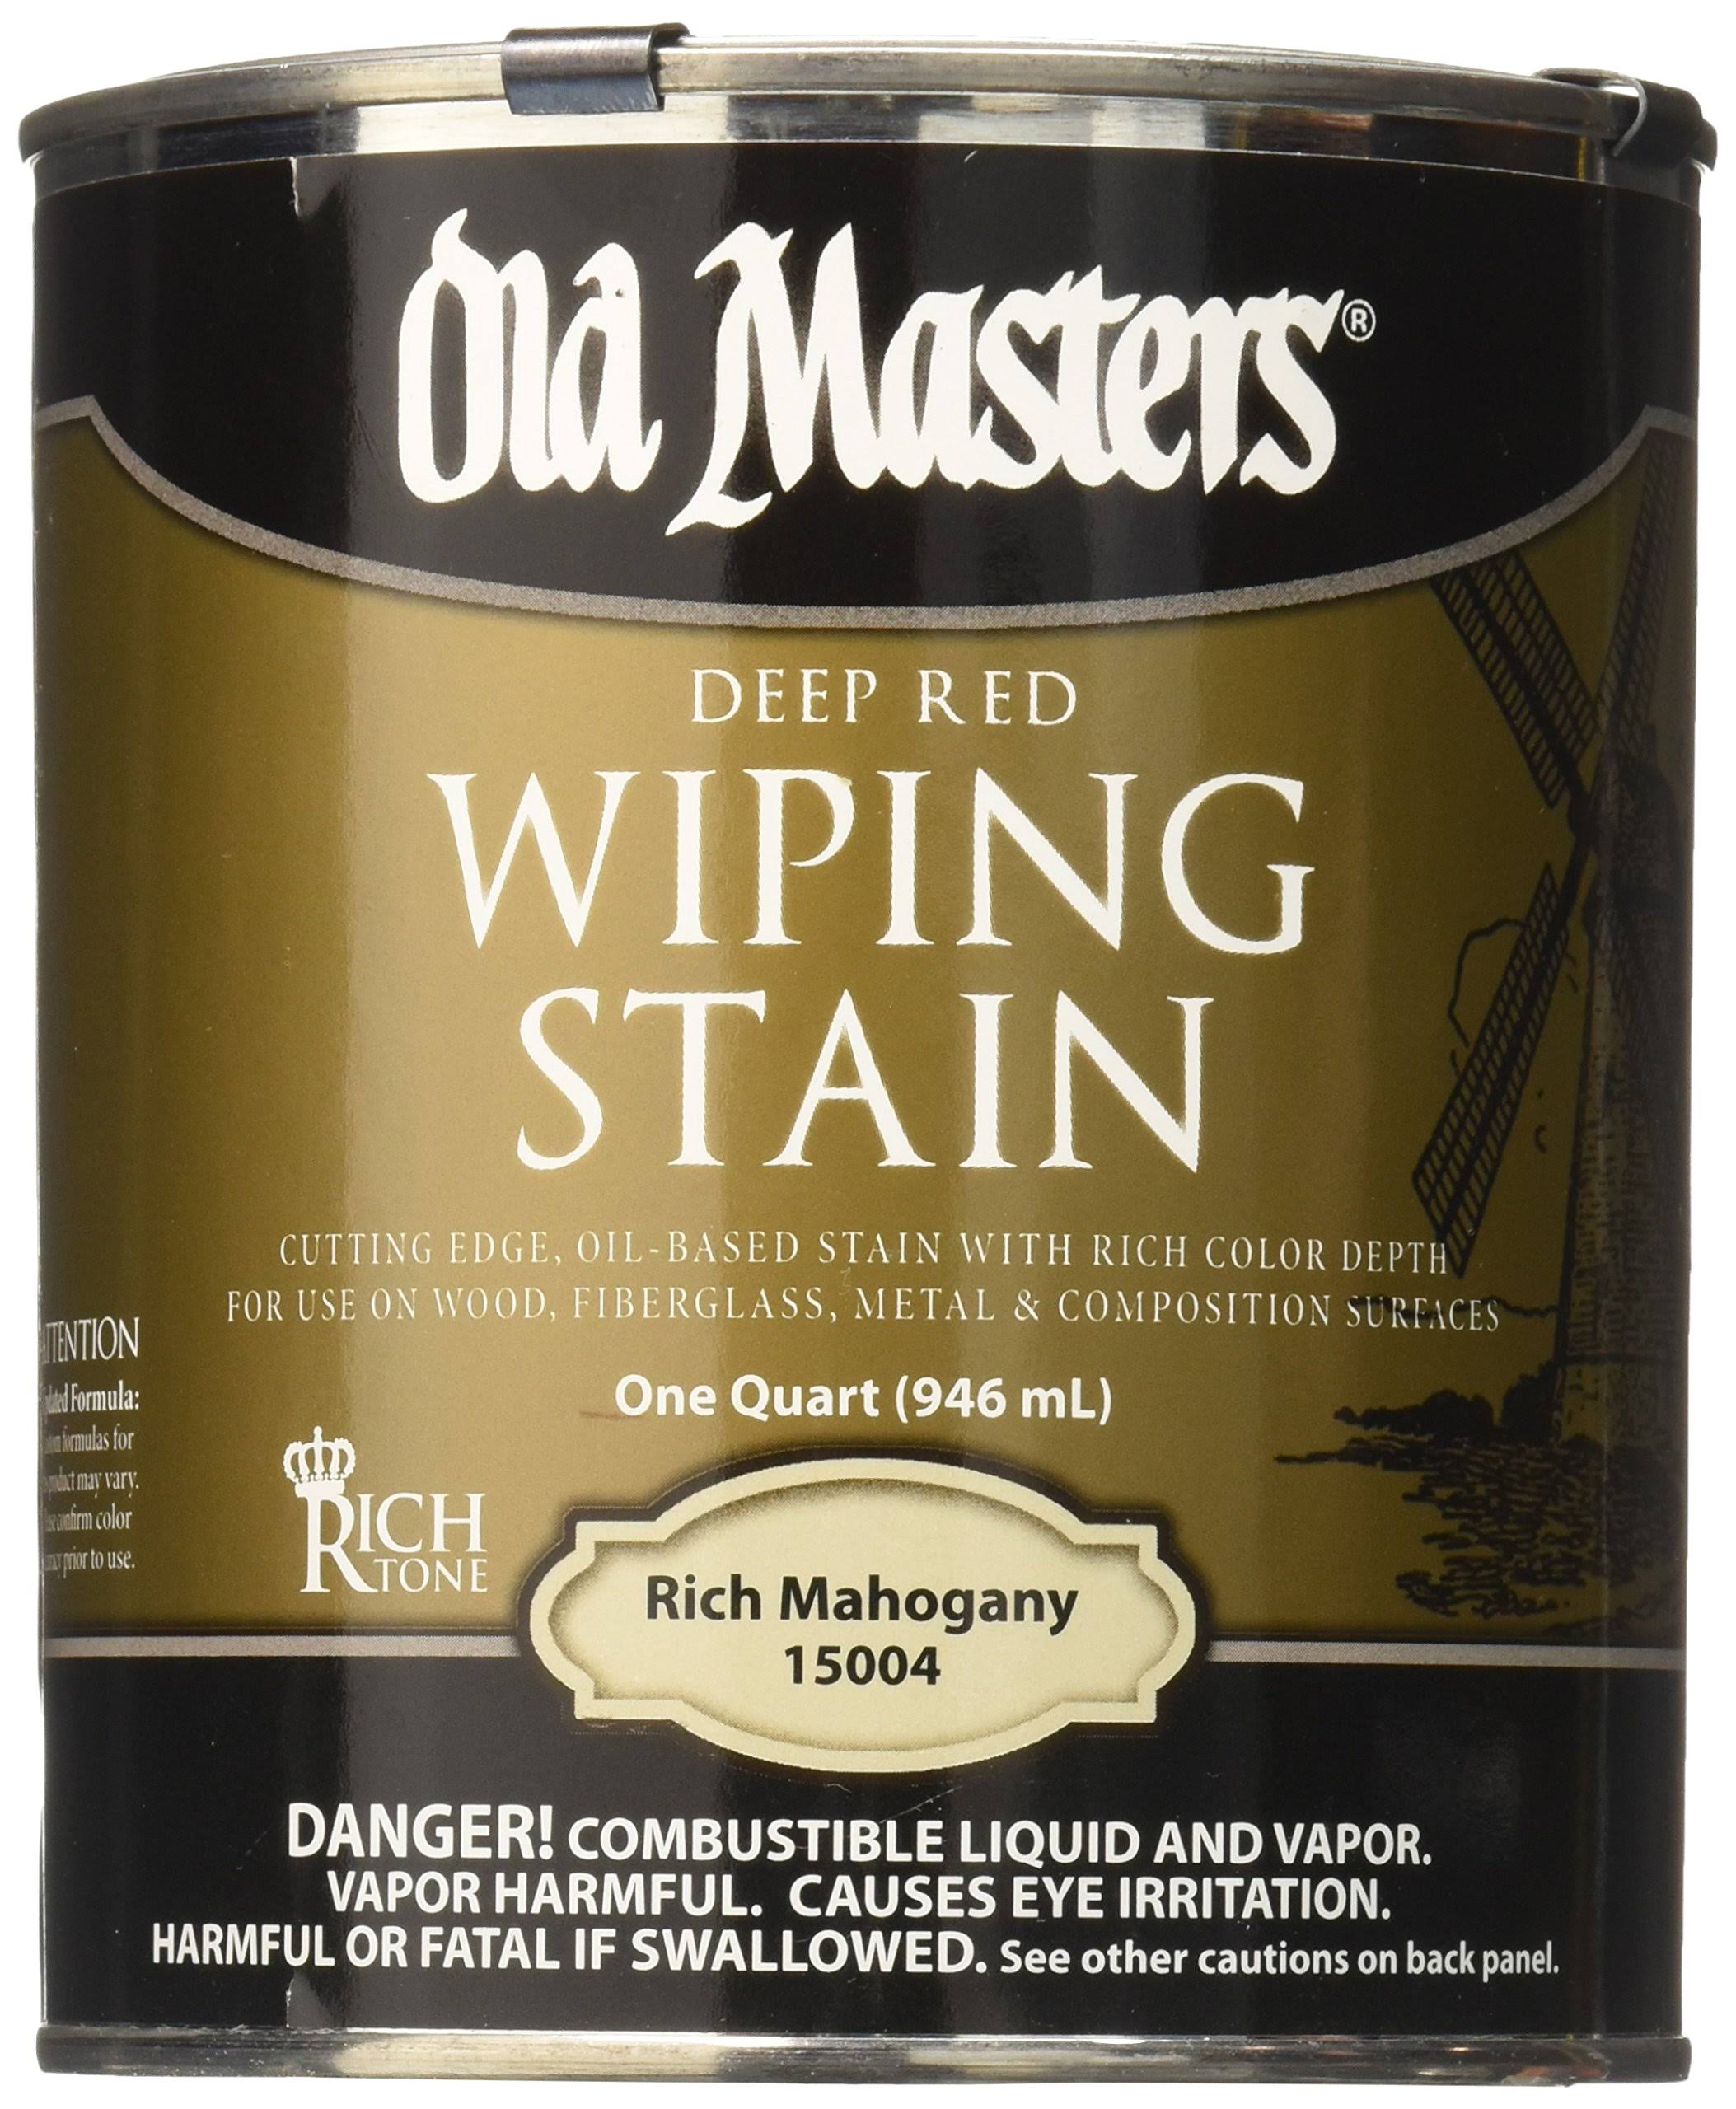 Old Masters Wiping Stain - 1504 Rich Mahogany